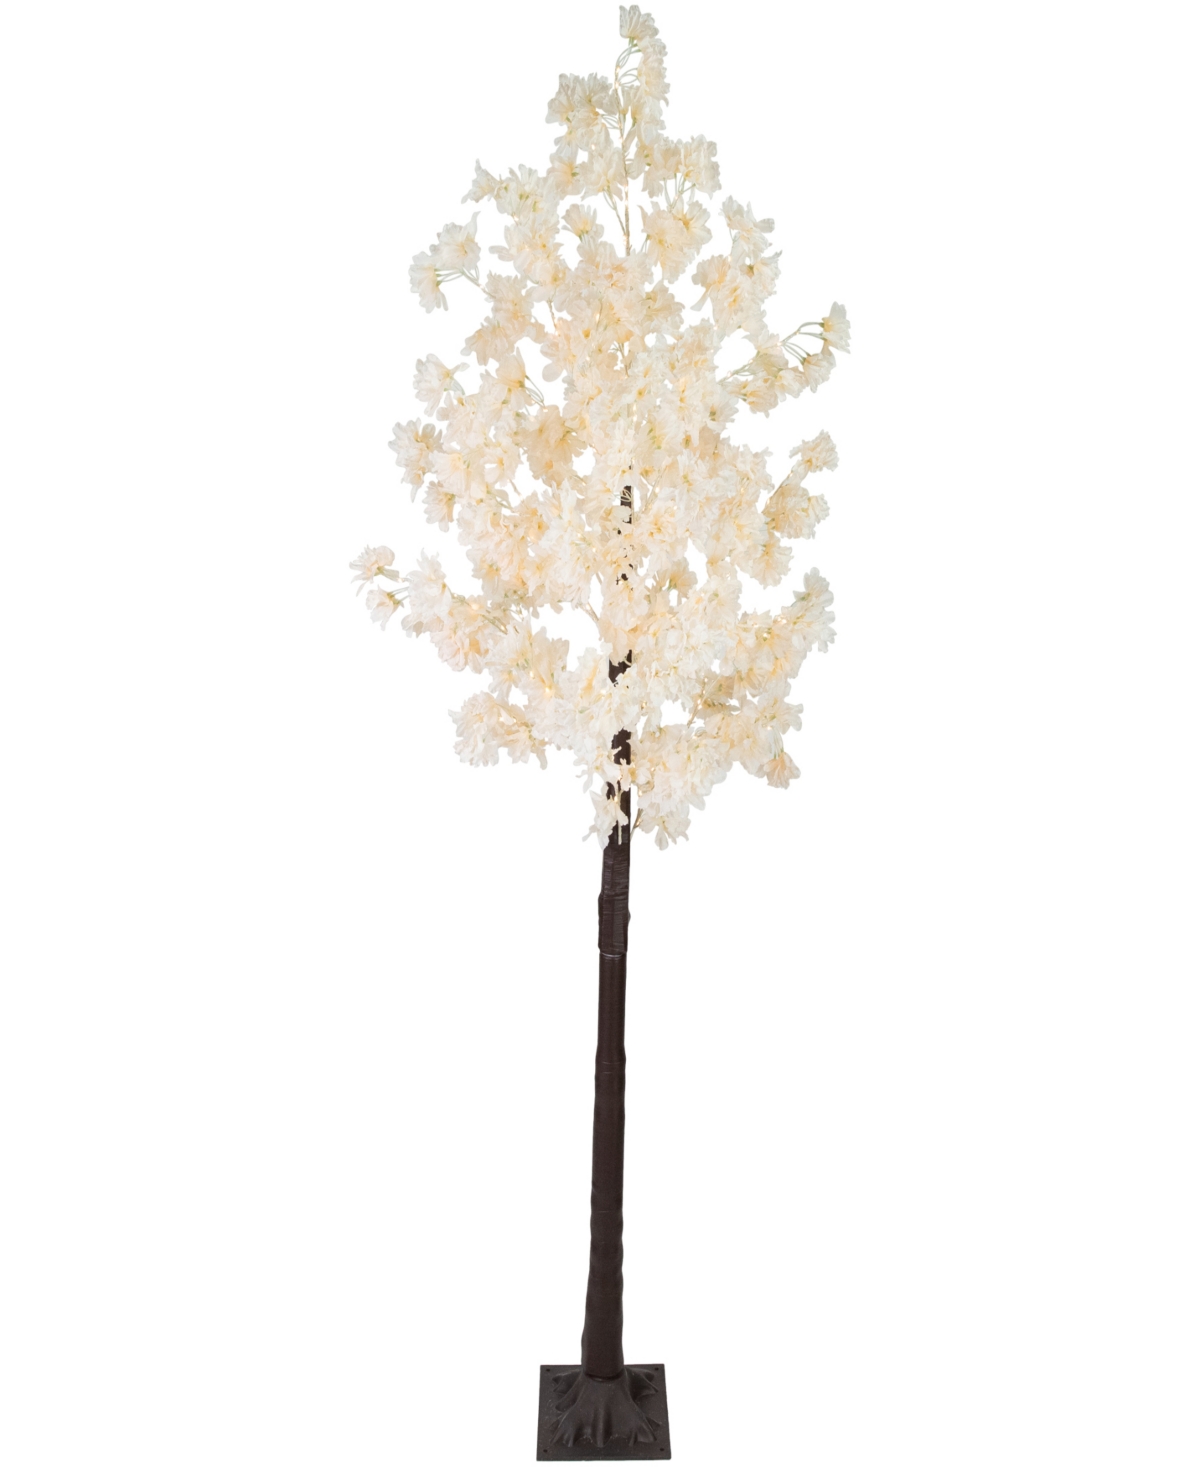 Northlight 6' Light Emitting Diode (led) Lighted Floral Artificial Tree Warm Lights In White